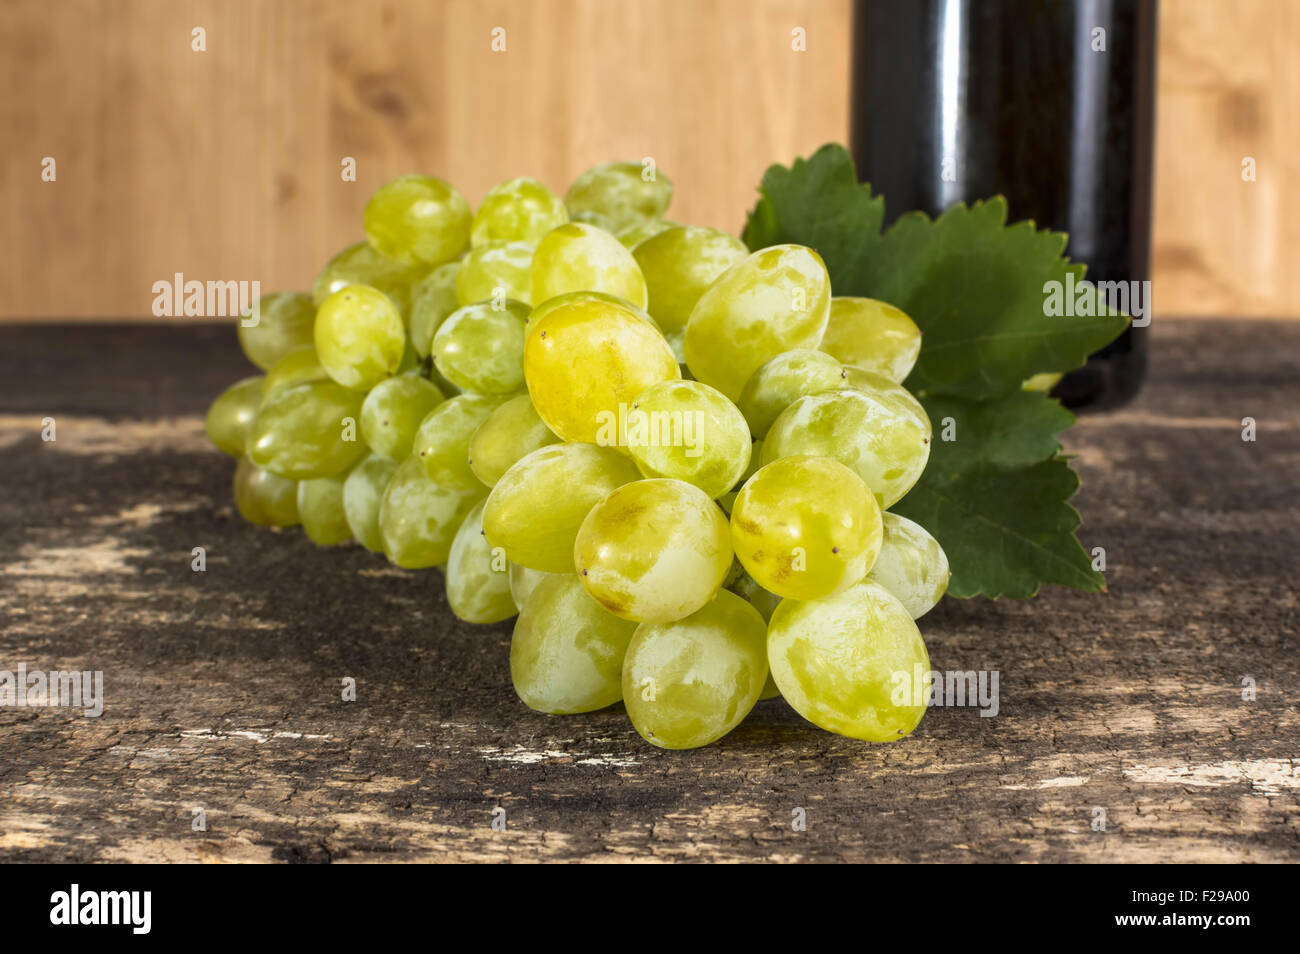 Ripe delicious grapes on wooden table. Selective focus. Stock Photo